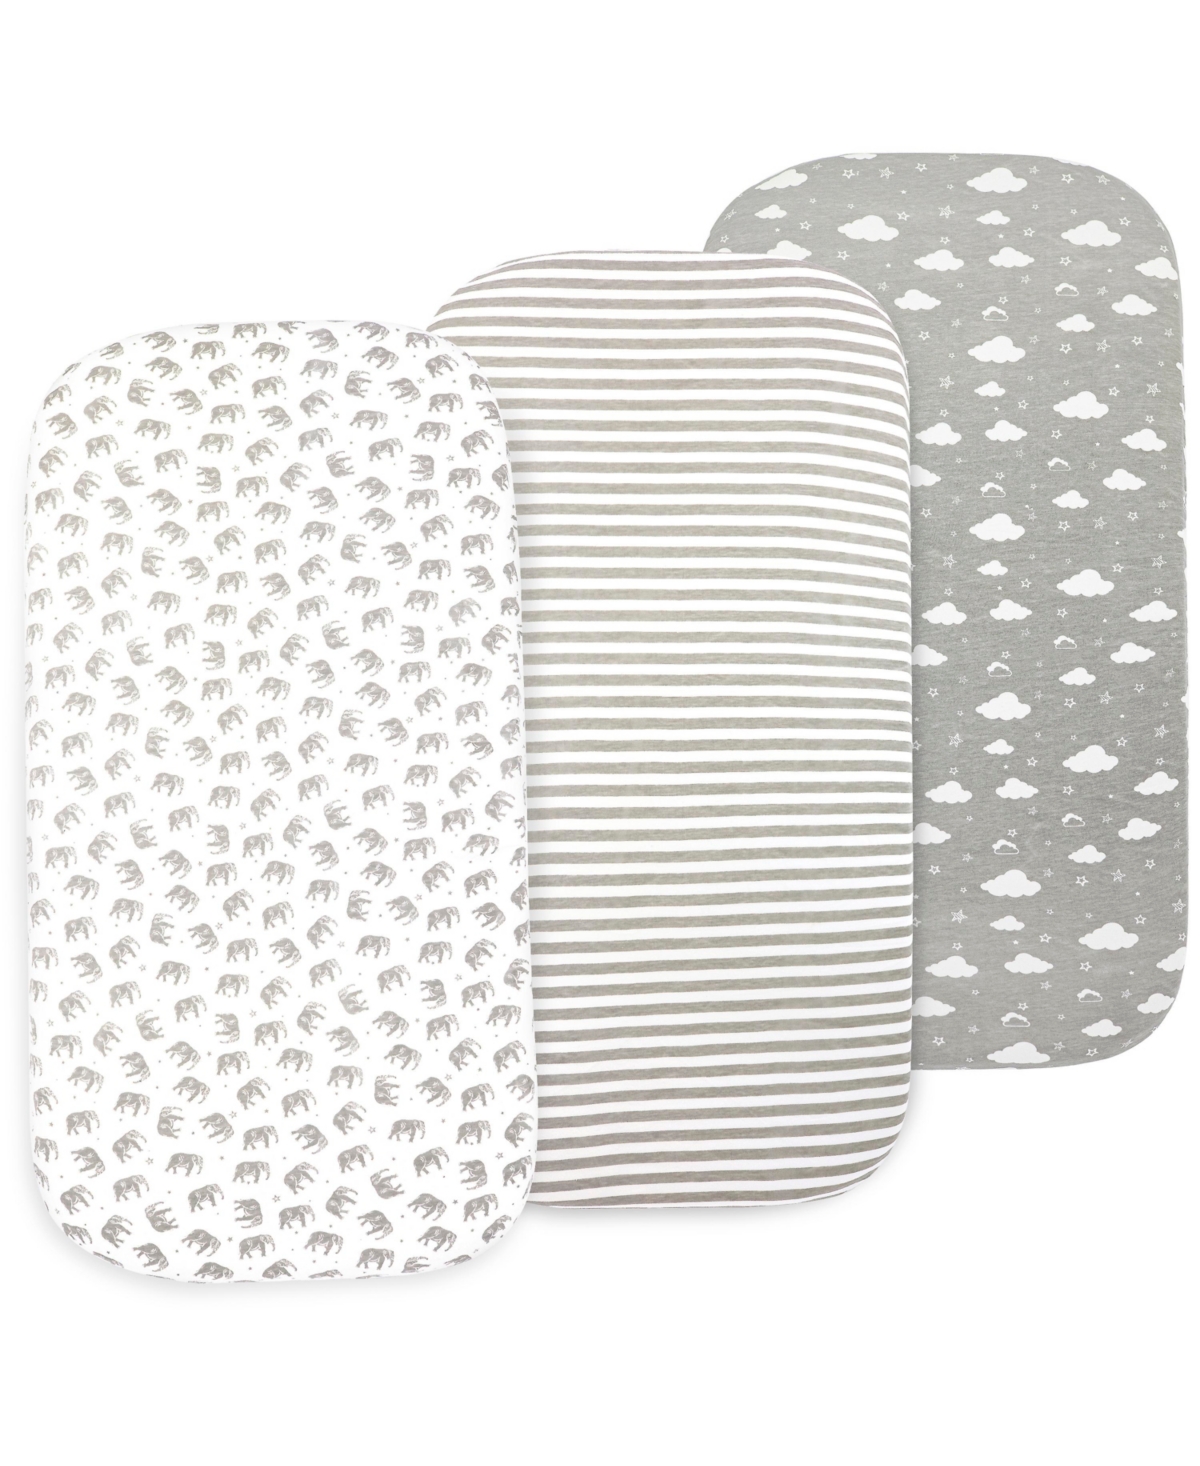 Bublo Baby Baby Bassinet Sheet Set For Boy And Girl, 3 Pack, Universal Fitted For Oval, Hourglass & Rectangle B In Grey